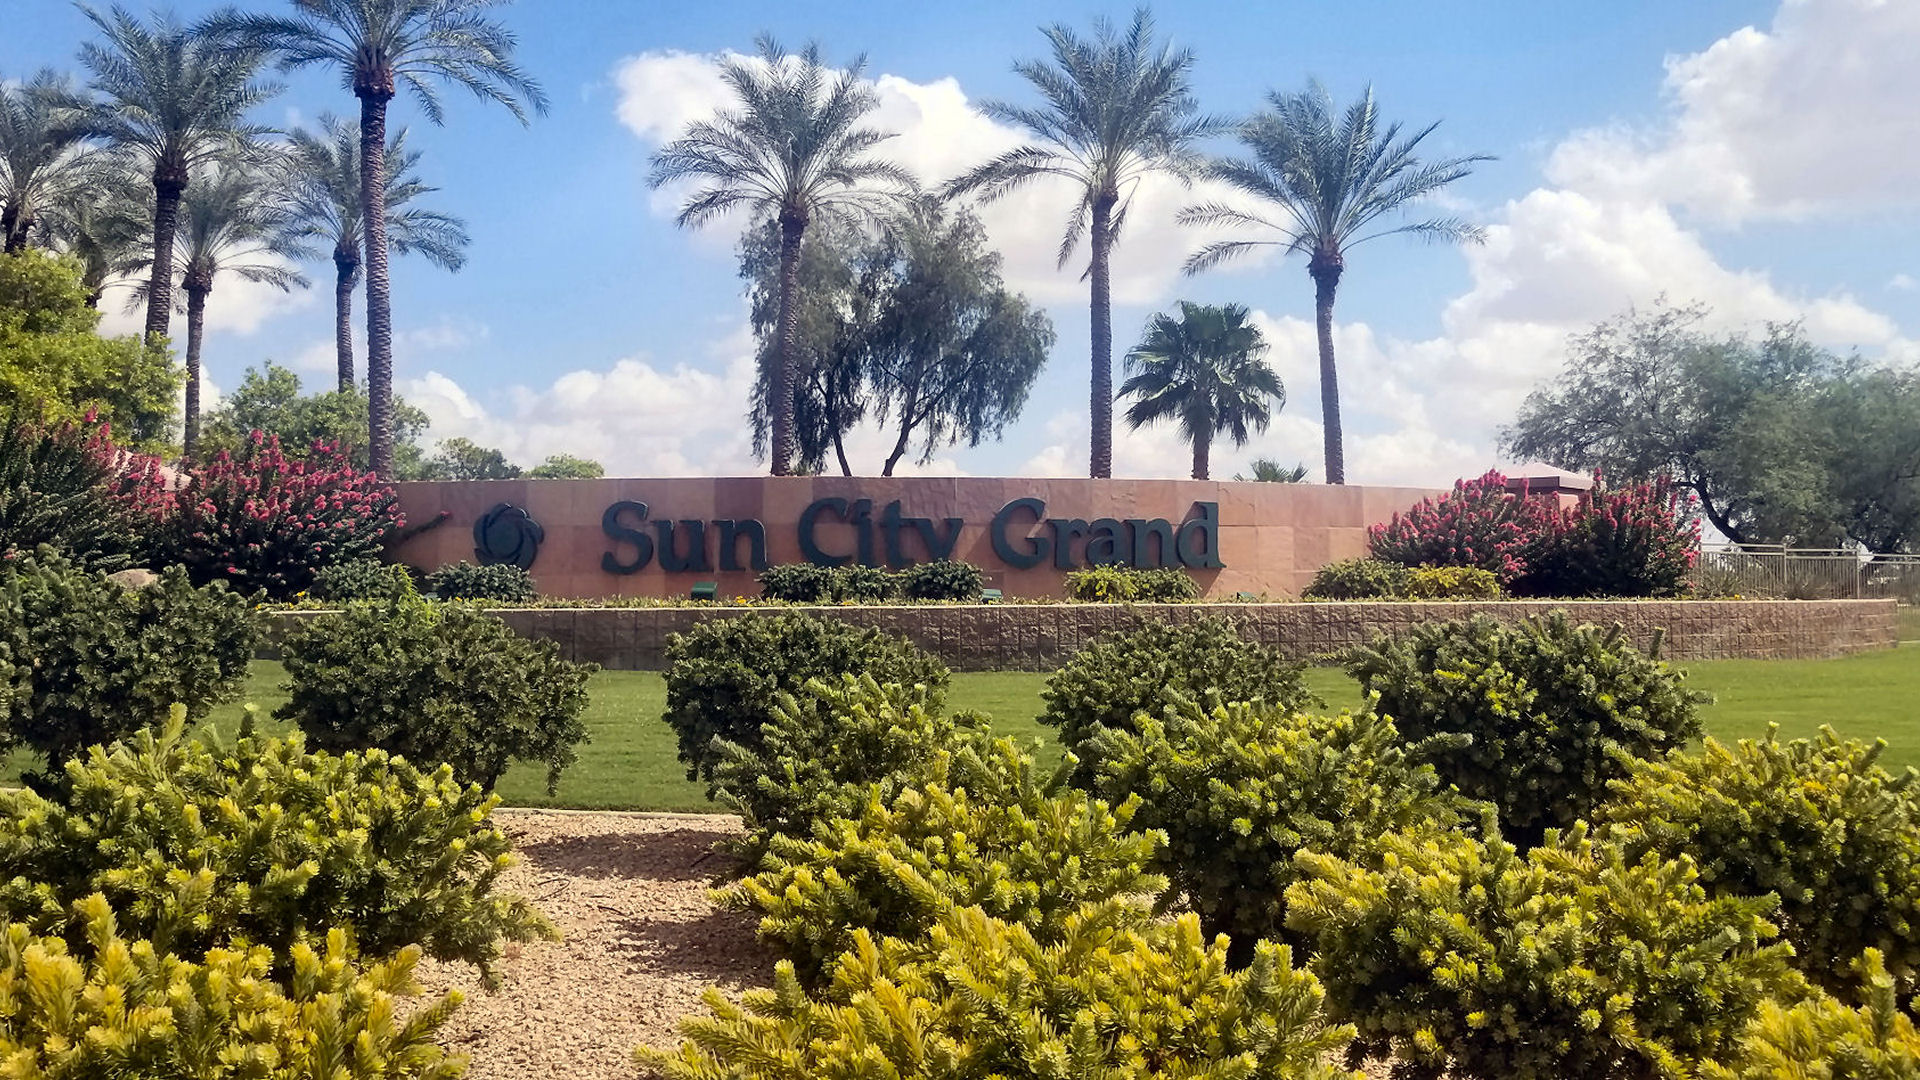 Photo of Sun City Grand entrance wall and landscaping